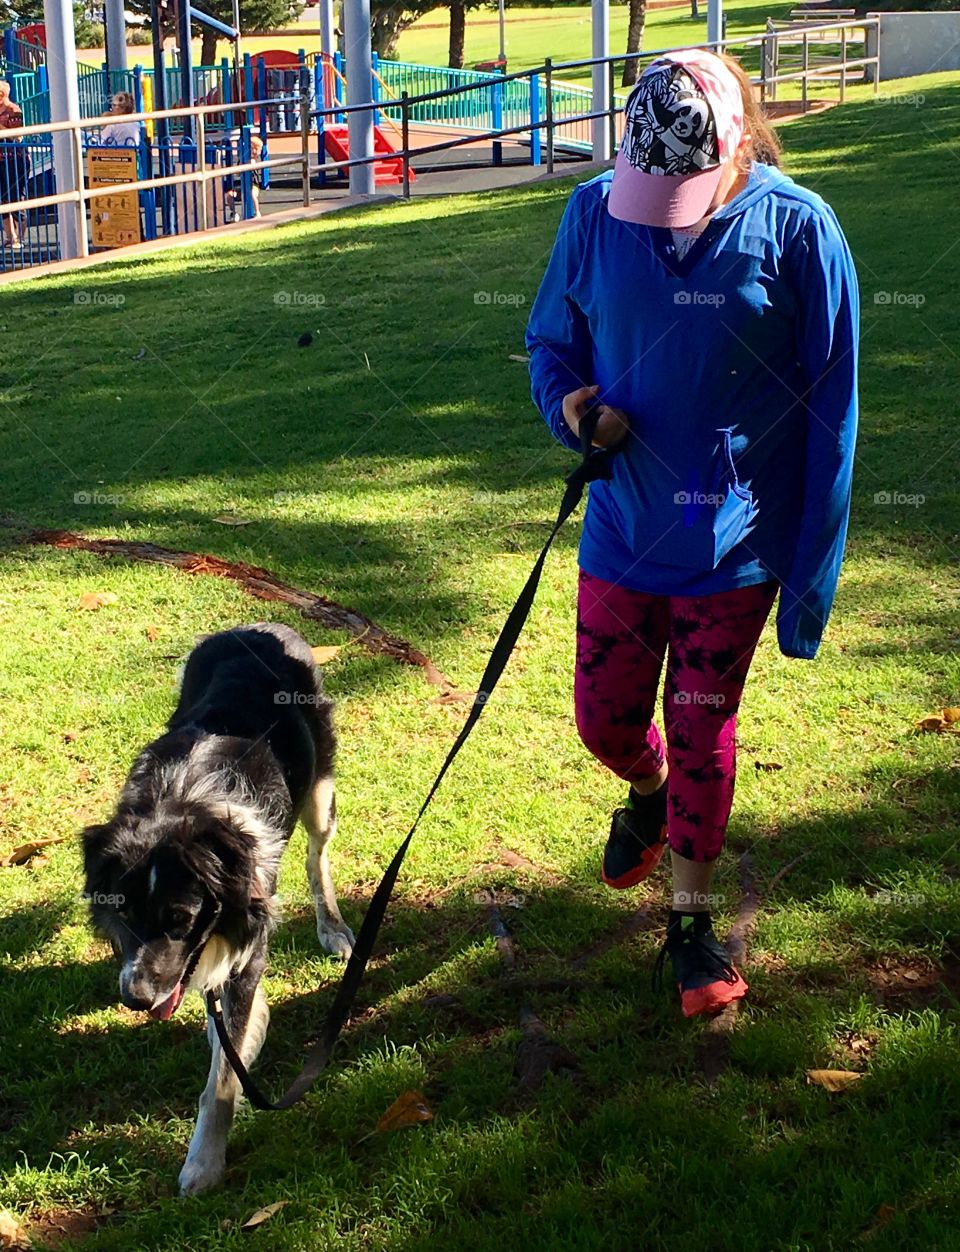 A young girl wearing a blue top, pink leggings tights and baseball cap walking border collie sheepdog on a blue leash in a park near a playground 